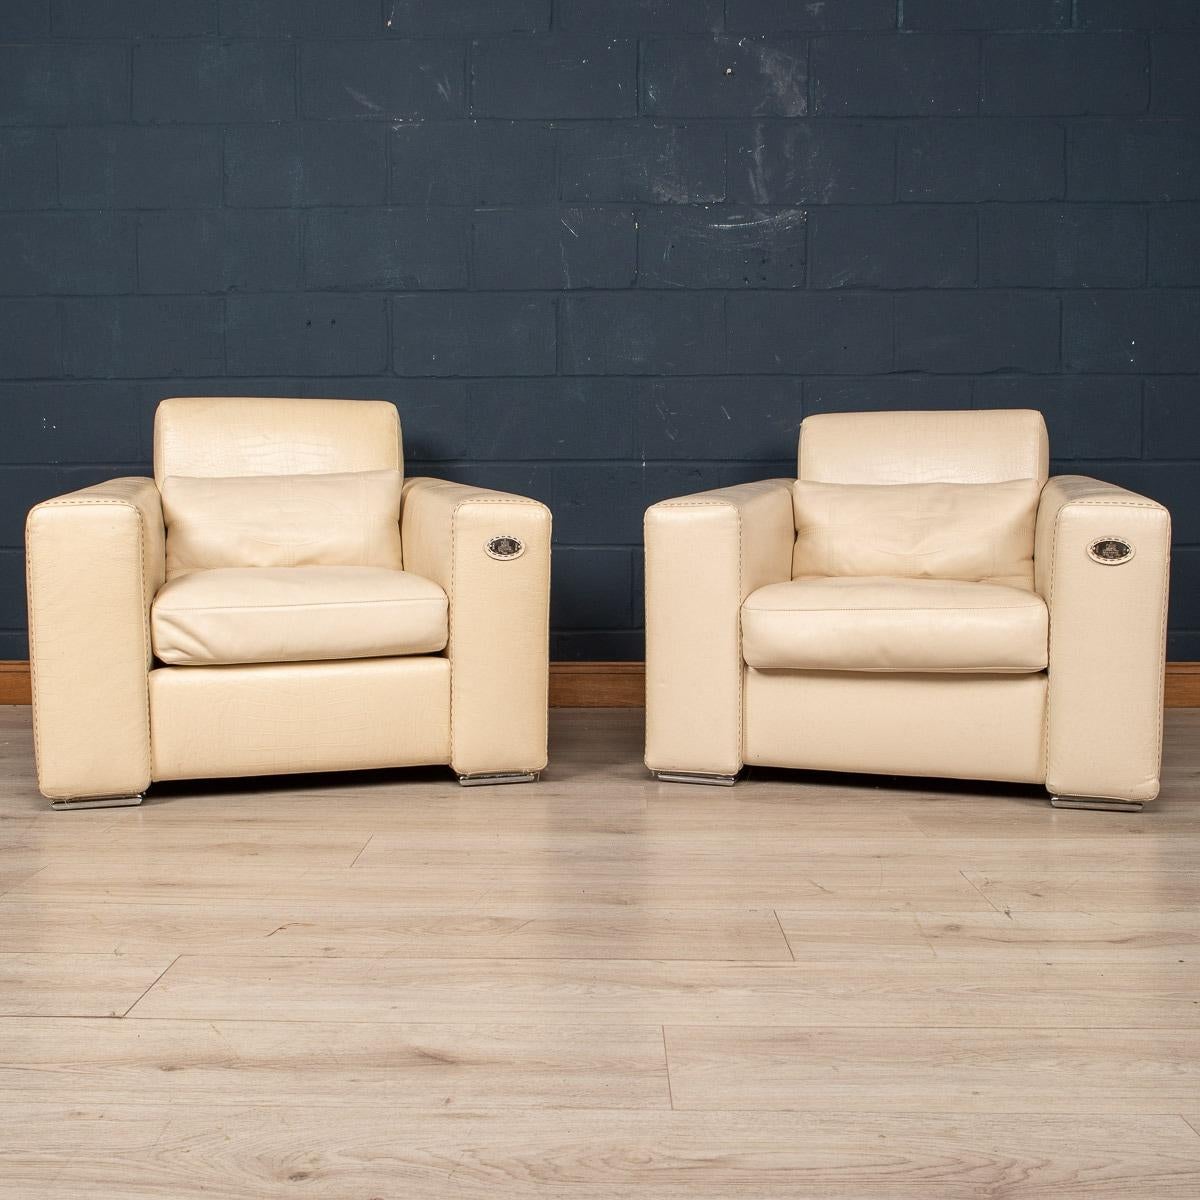 A stunning pair of armchairs made in Italy by Fendi. Dating to the latter part of the 20th century, the supple white leather upholstery has a faux crocodile pattern on the armrests and back rest, giving them an elegant and unusual look. The details